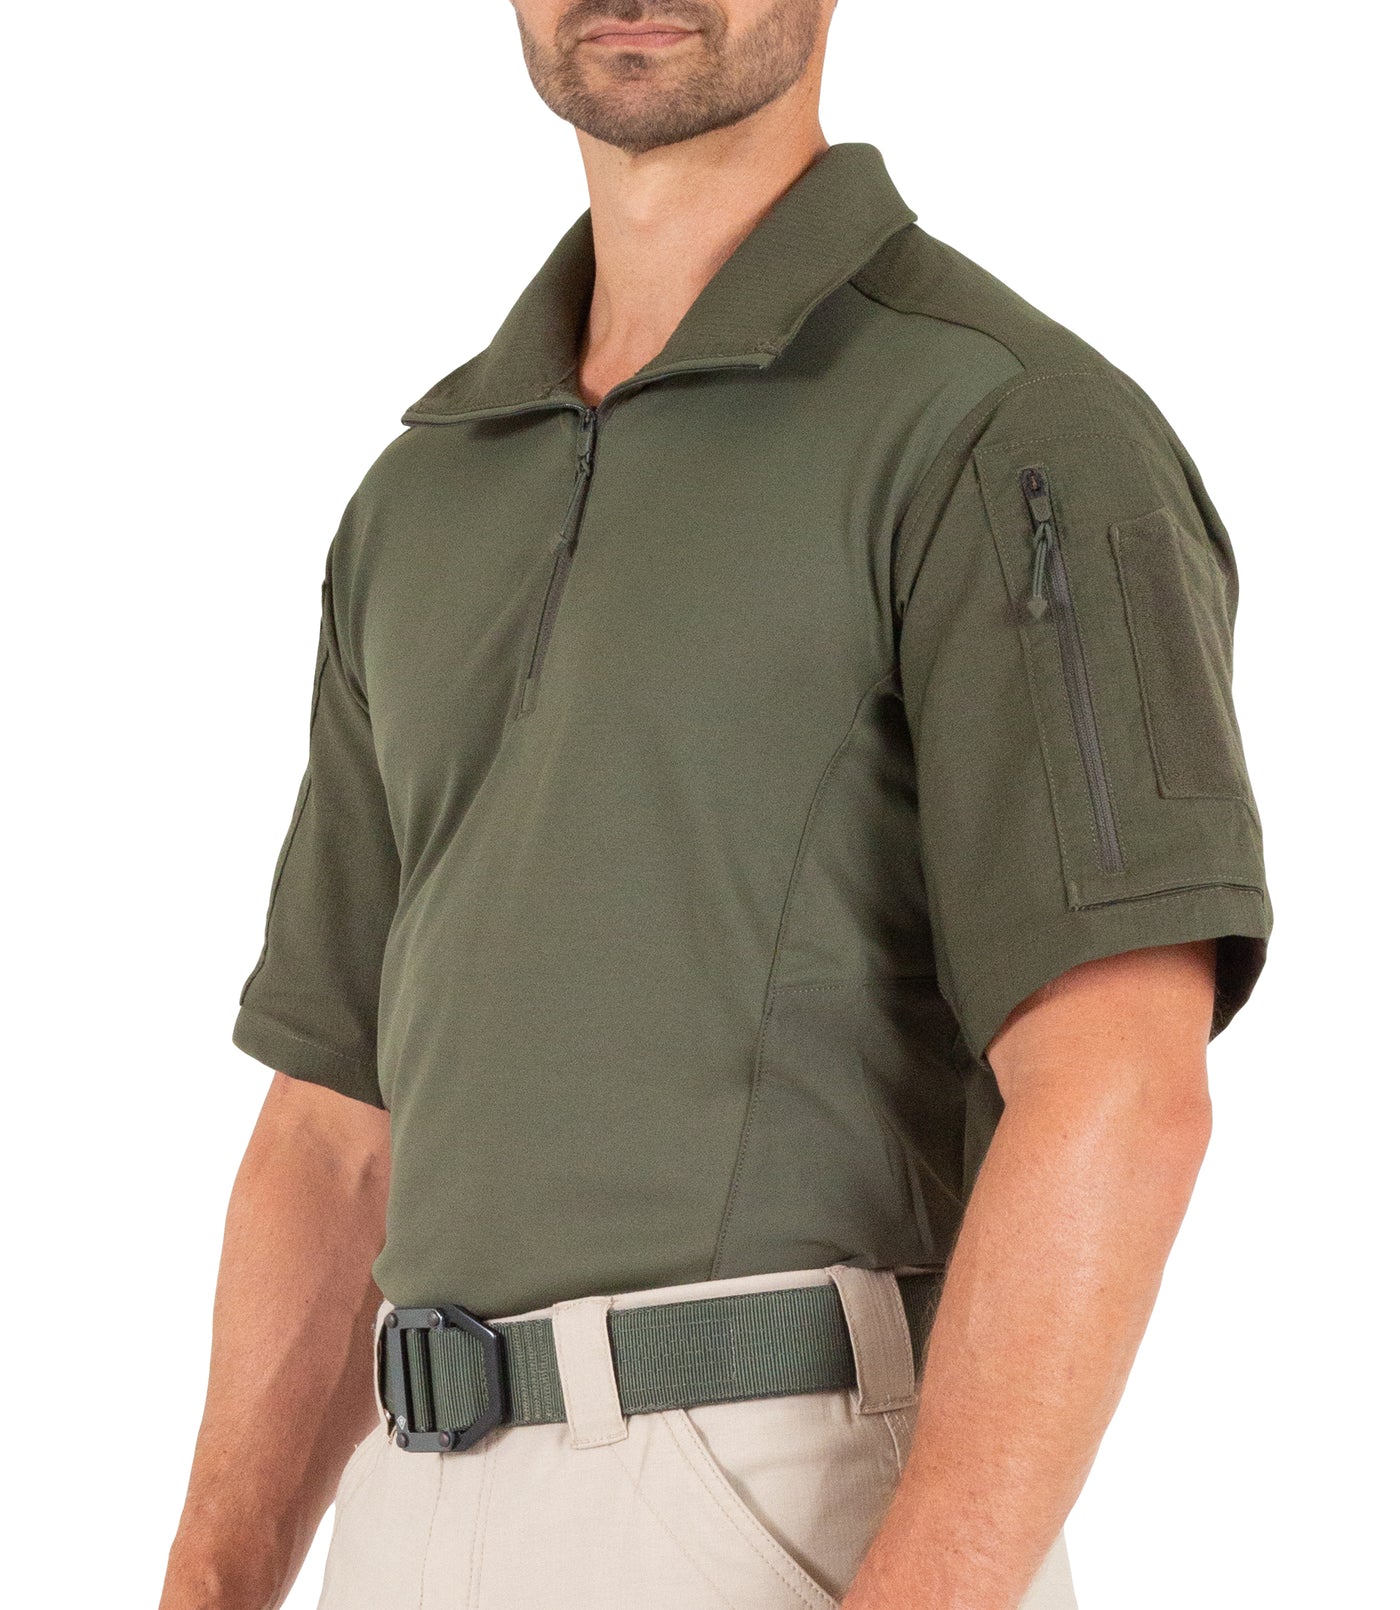 Ares Defender Tactical Shirt